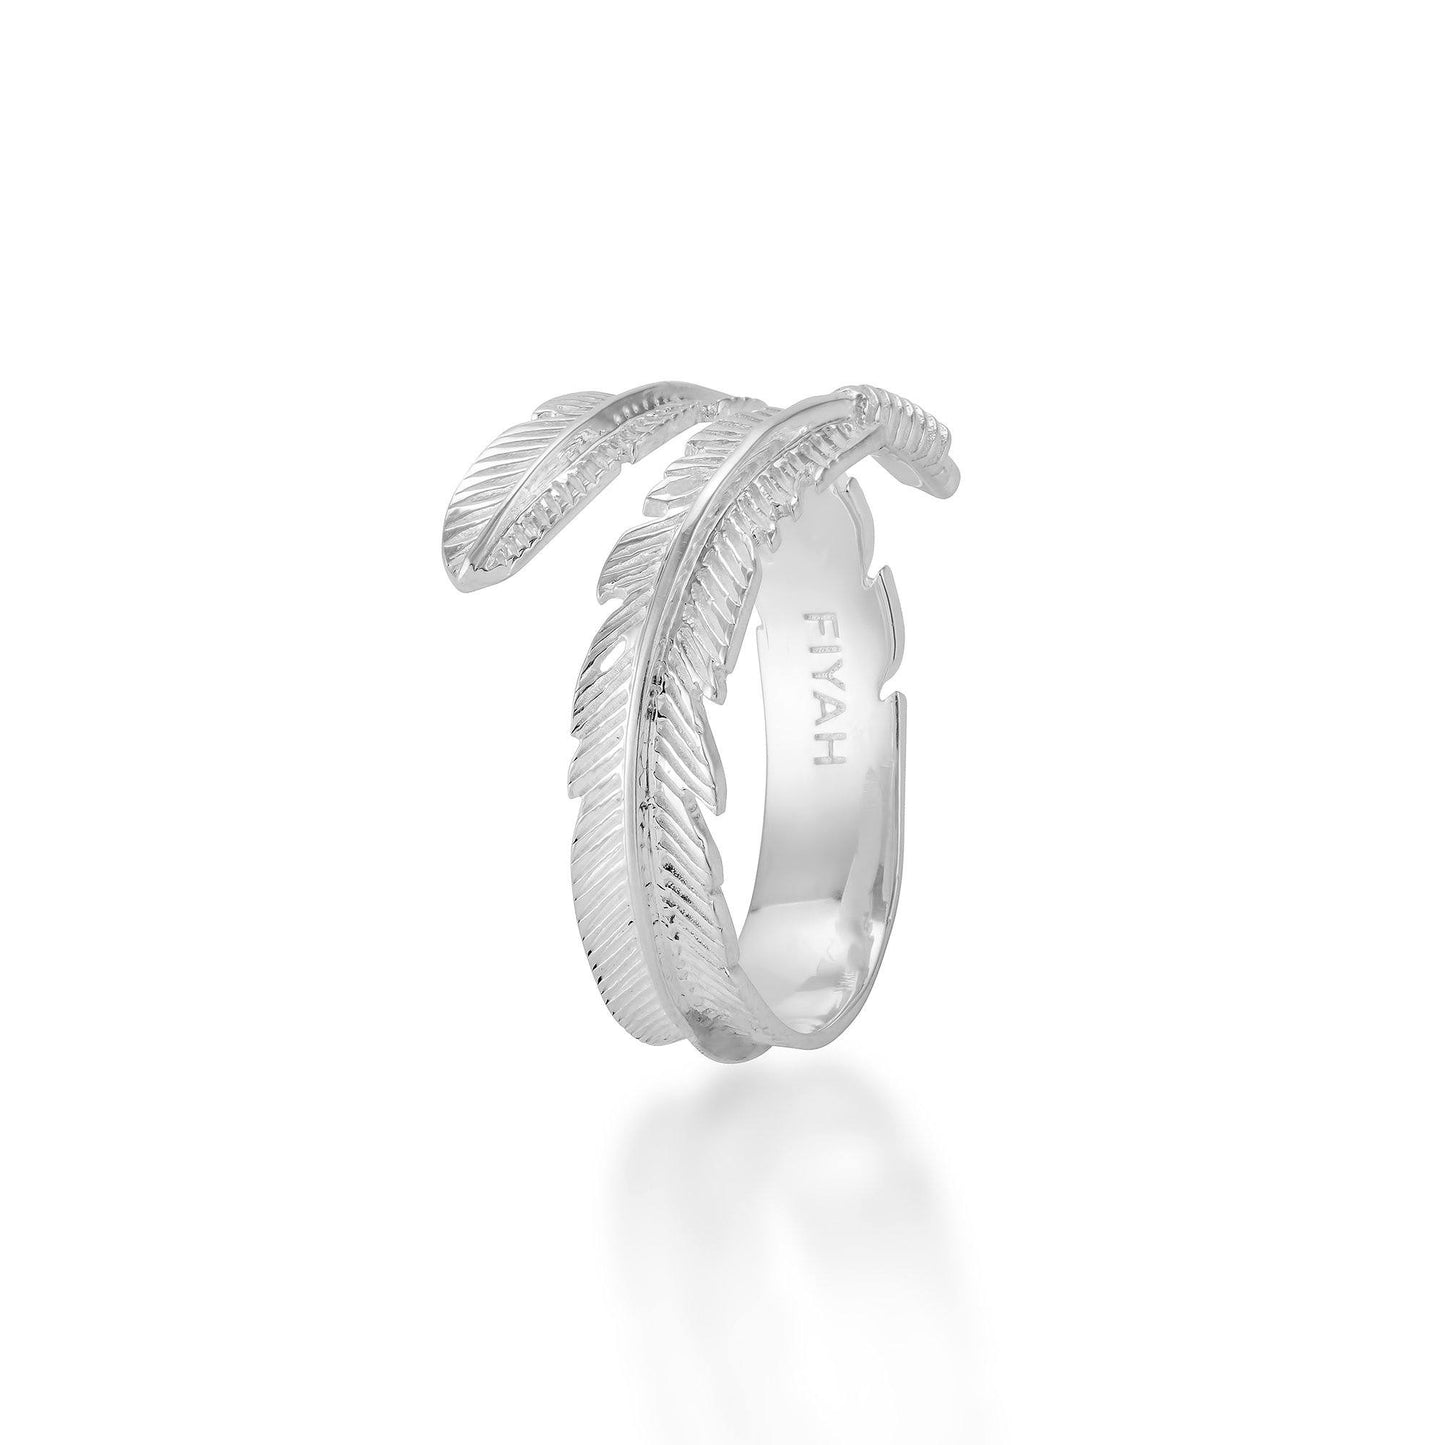 '' I Will Be Always Here With You '' Plume Ring